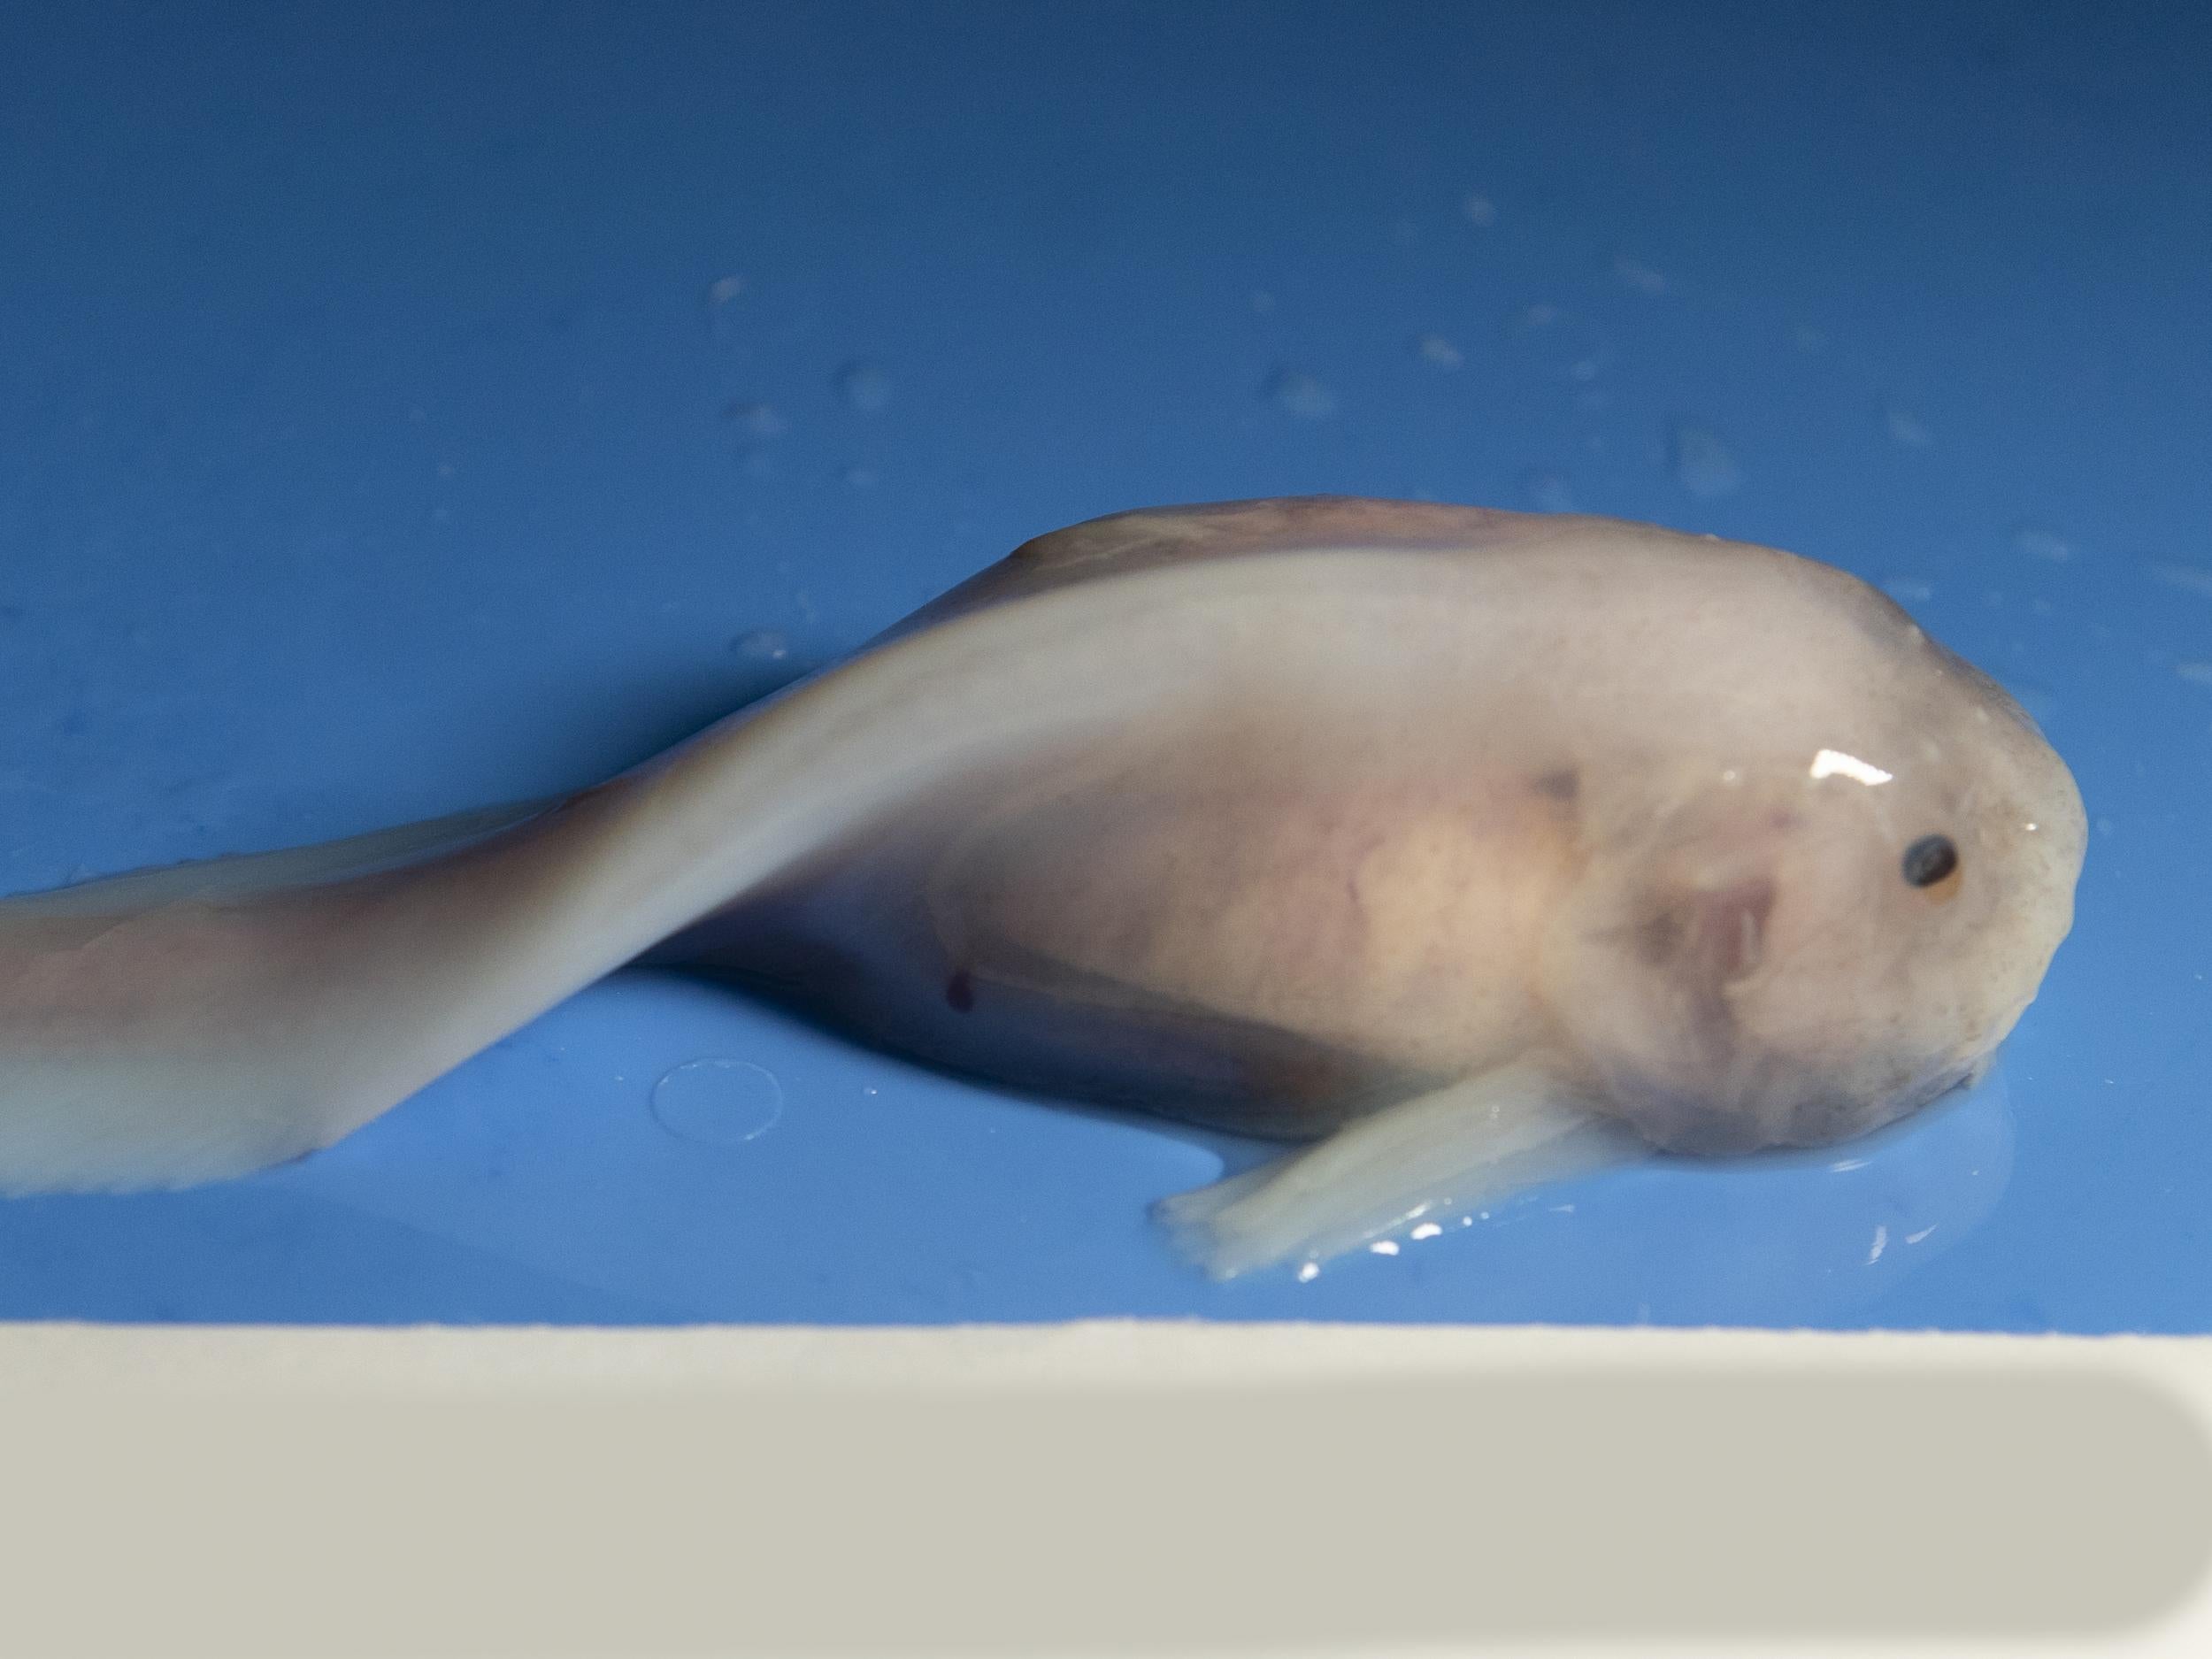 Deep sea snailfish has soft bones and open skull to cope with crushing  pressure, study finds, The Independent